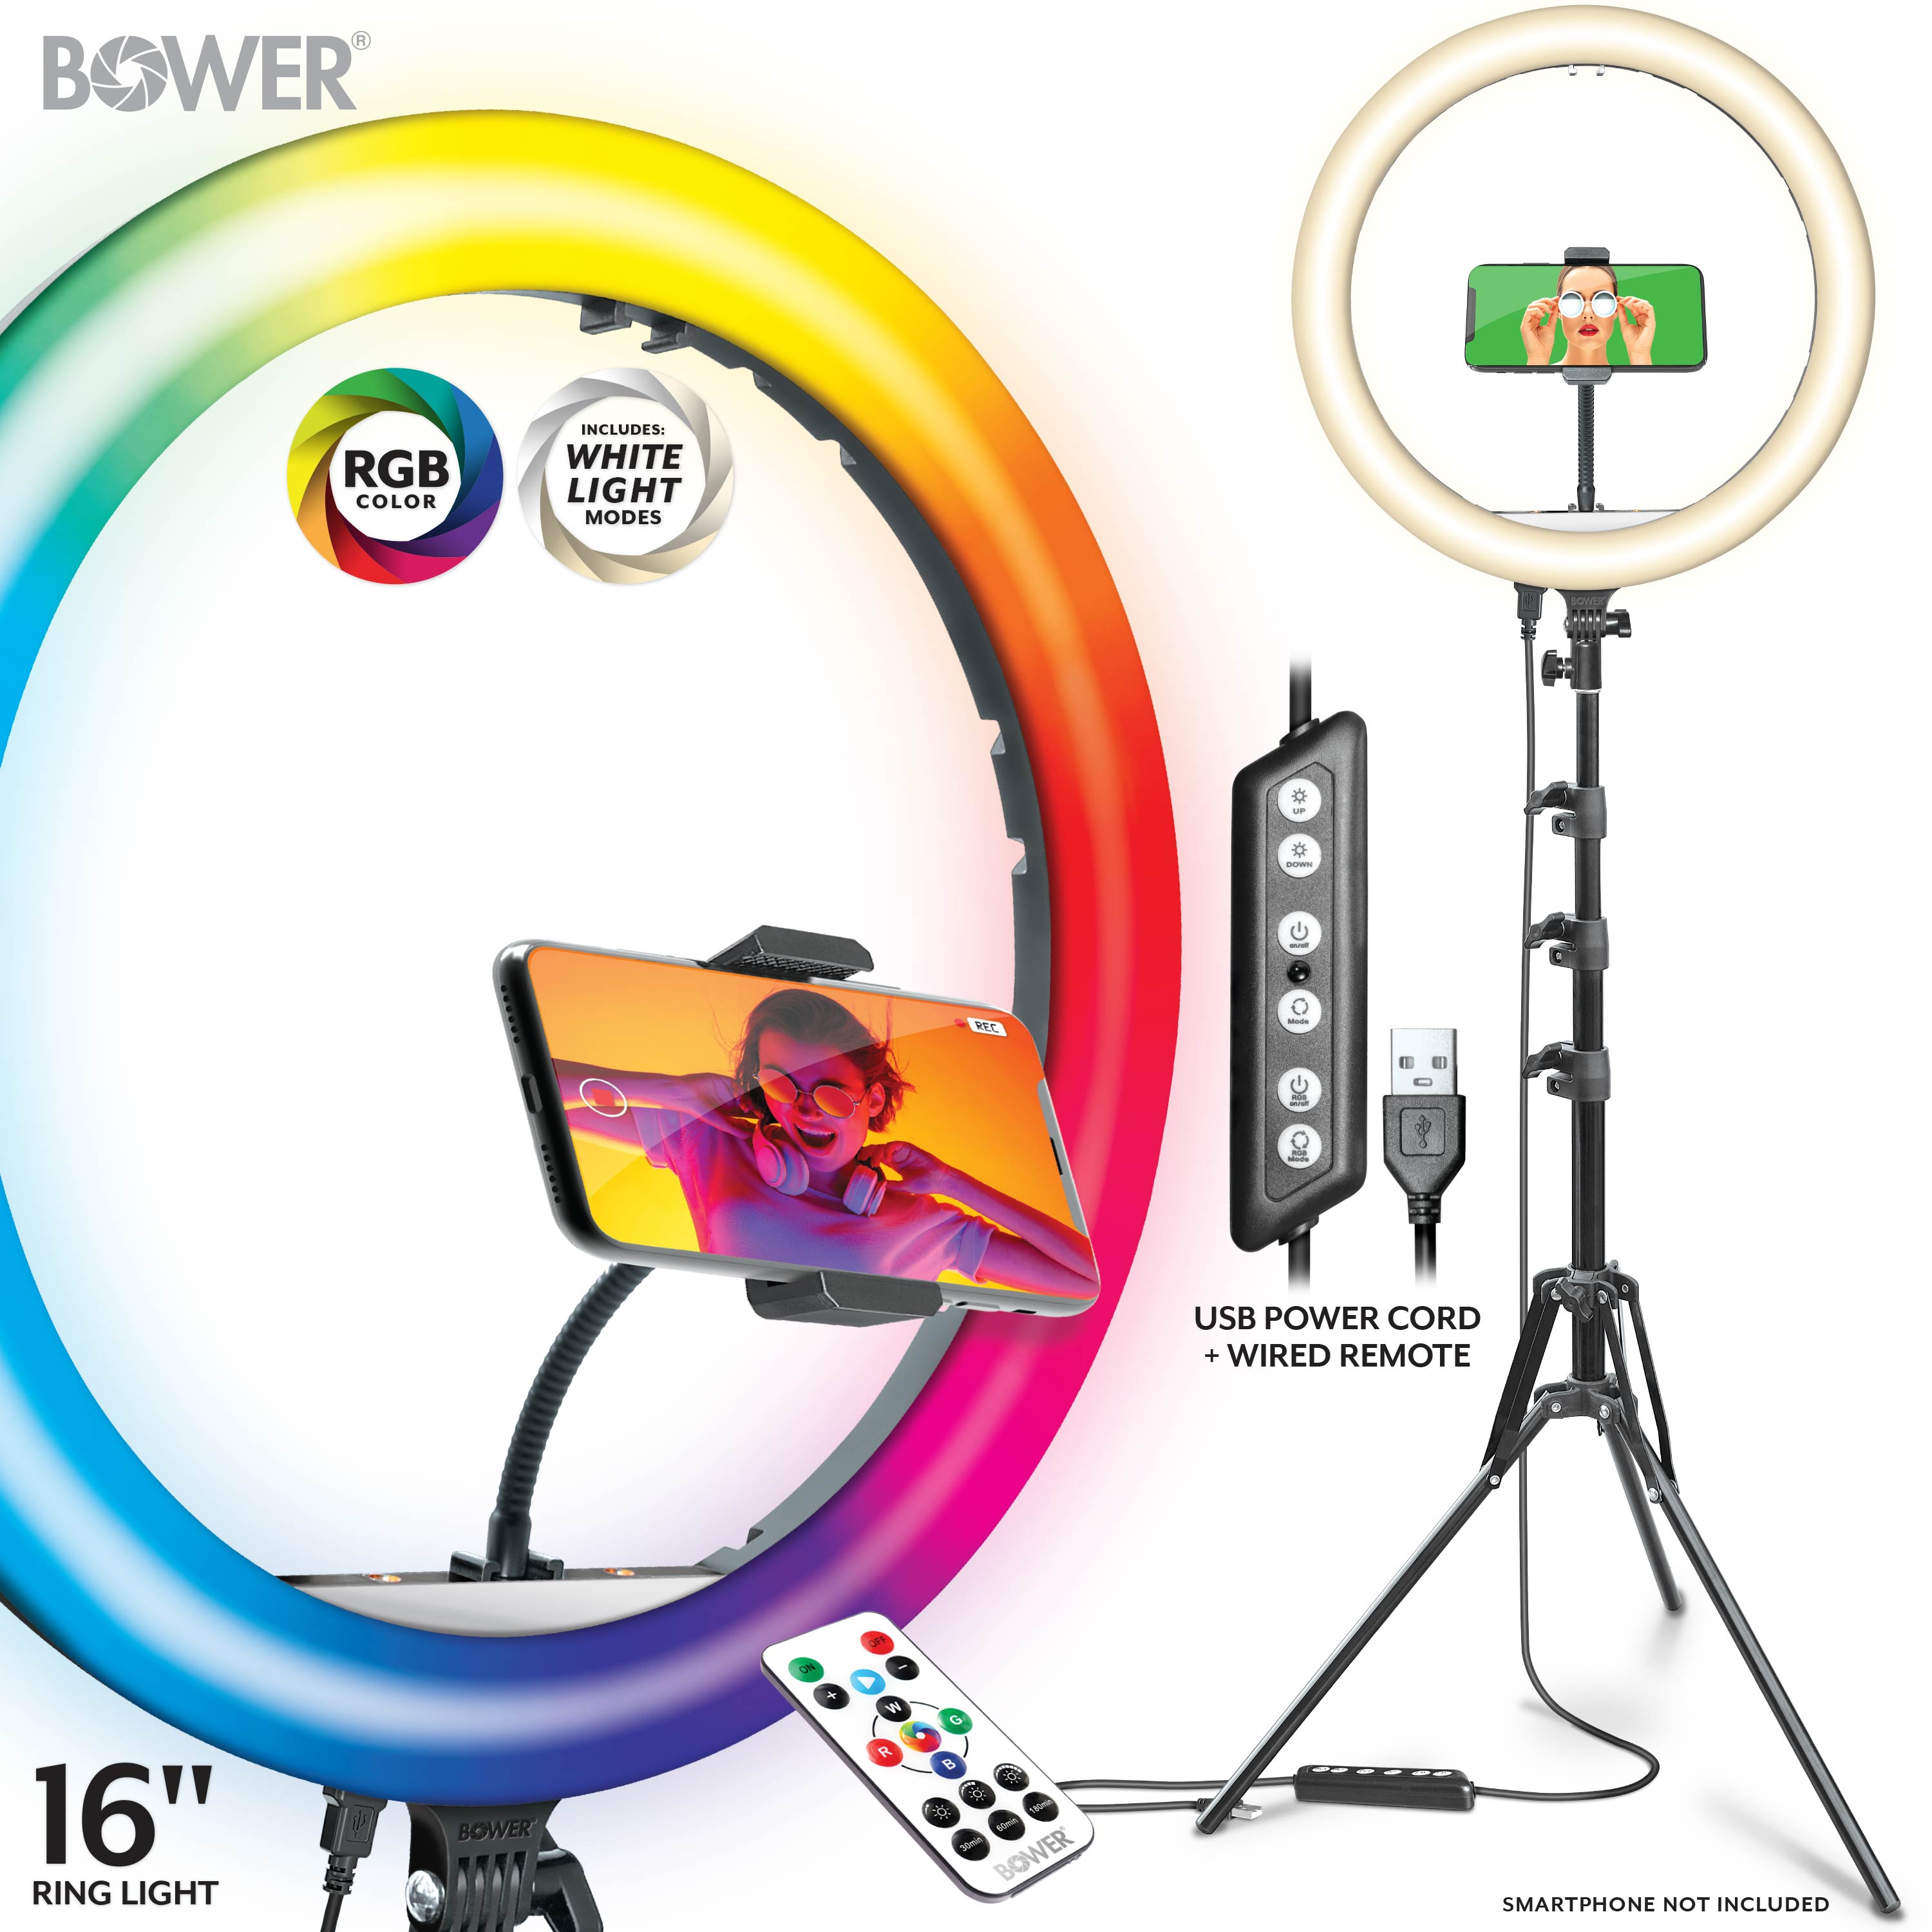 Bower Content Creator Kit with16-inch RGB Ring Light, 62-inch Adjustable Tripod, and Green Screen for Content Creation Camera Accessory - image 3 of 7